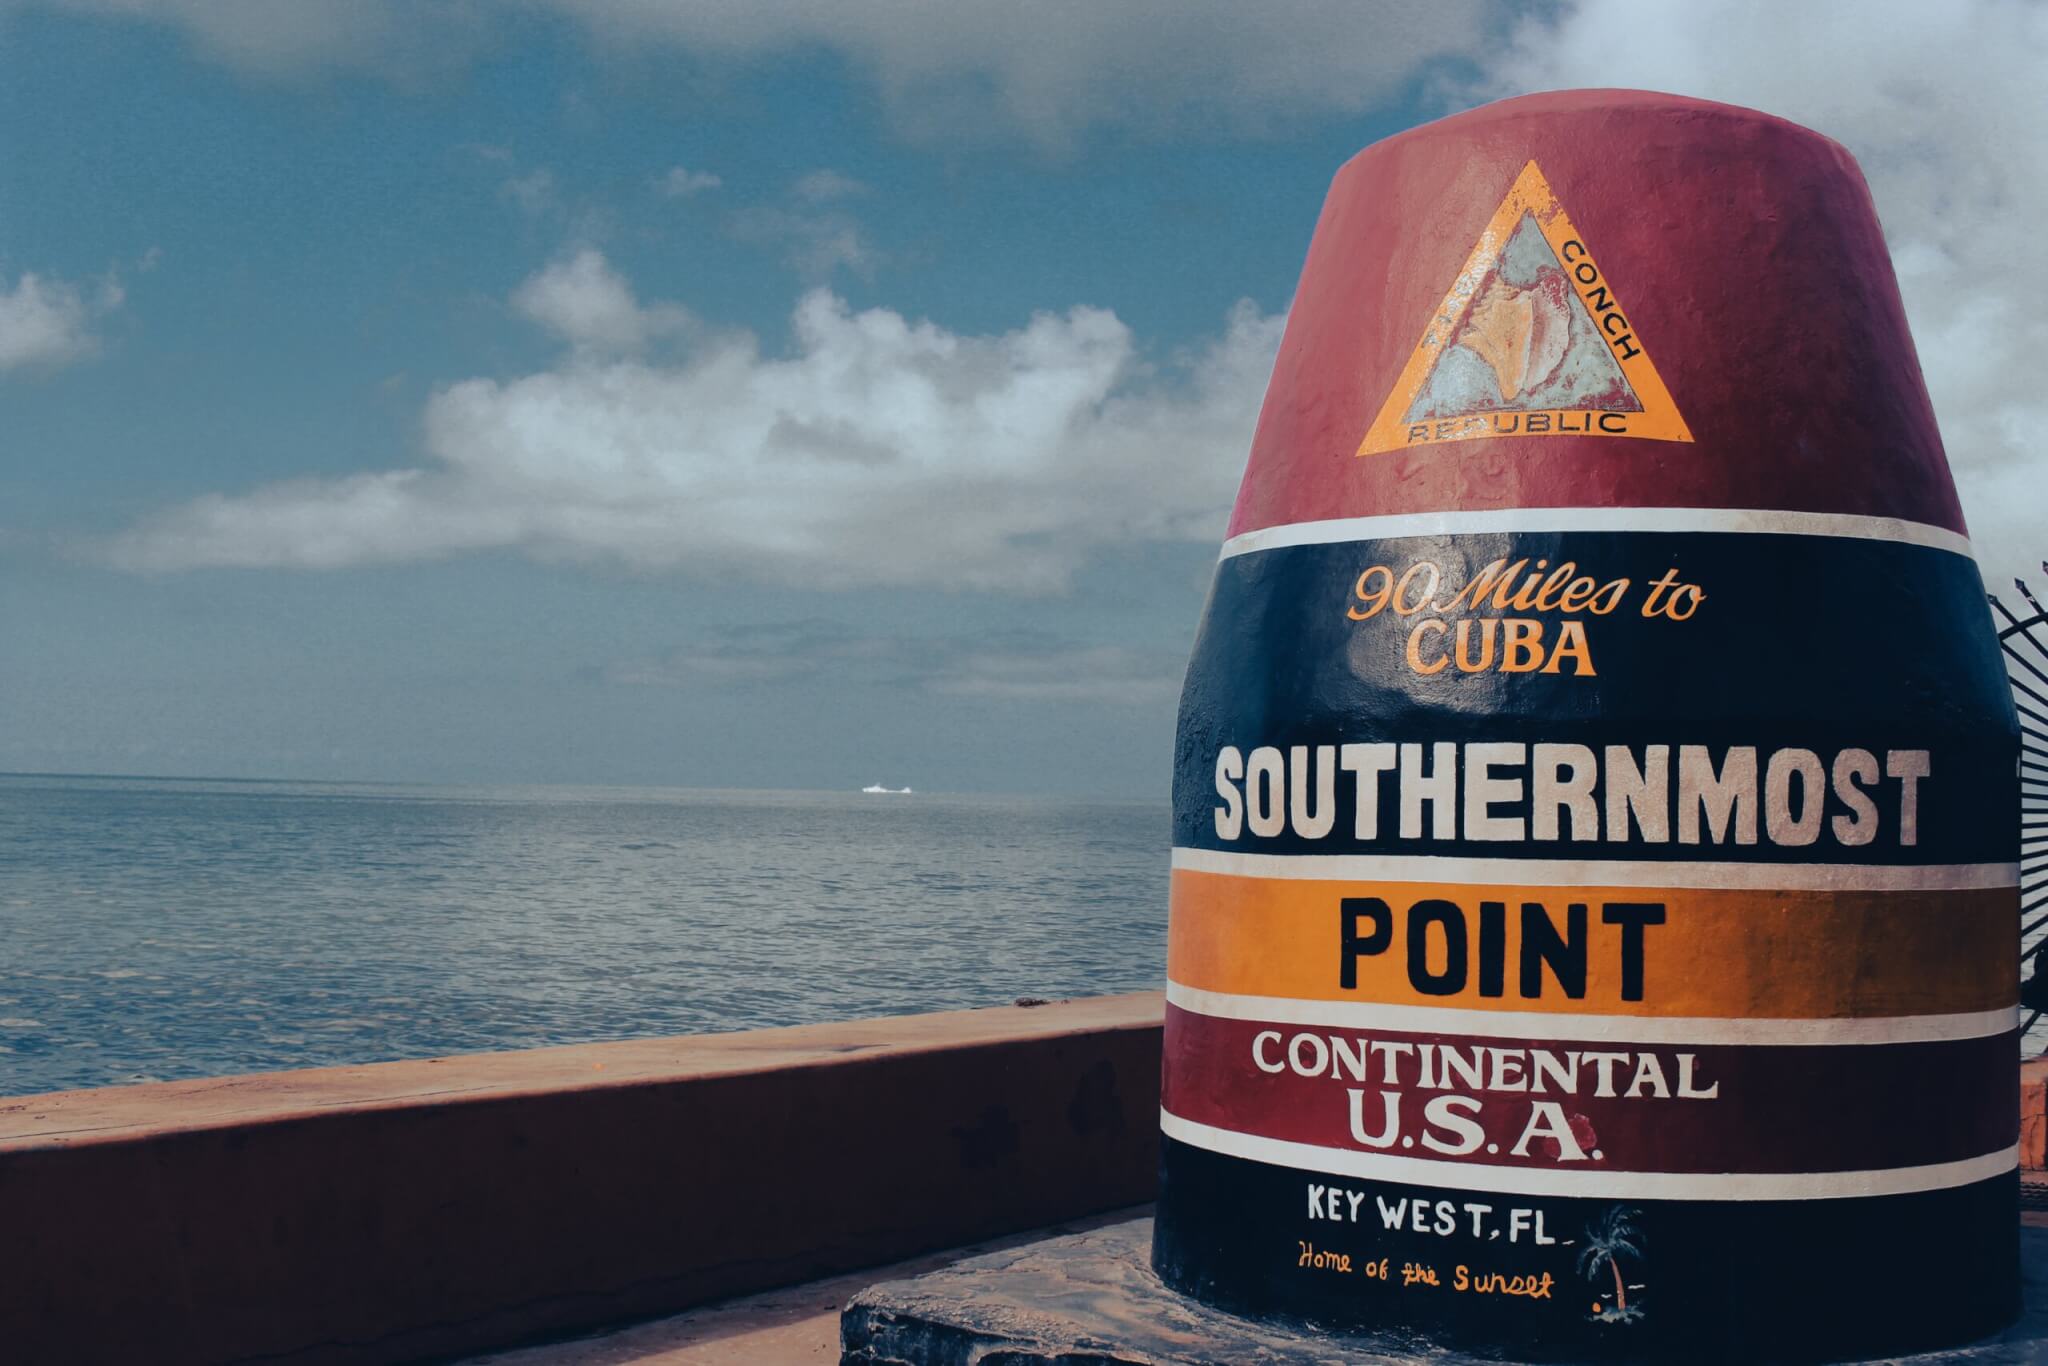 The southernmost point of the continental United States is in Key West, Florida.